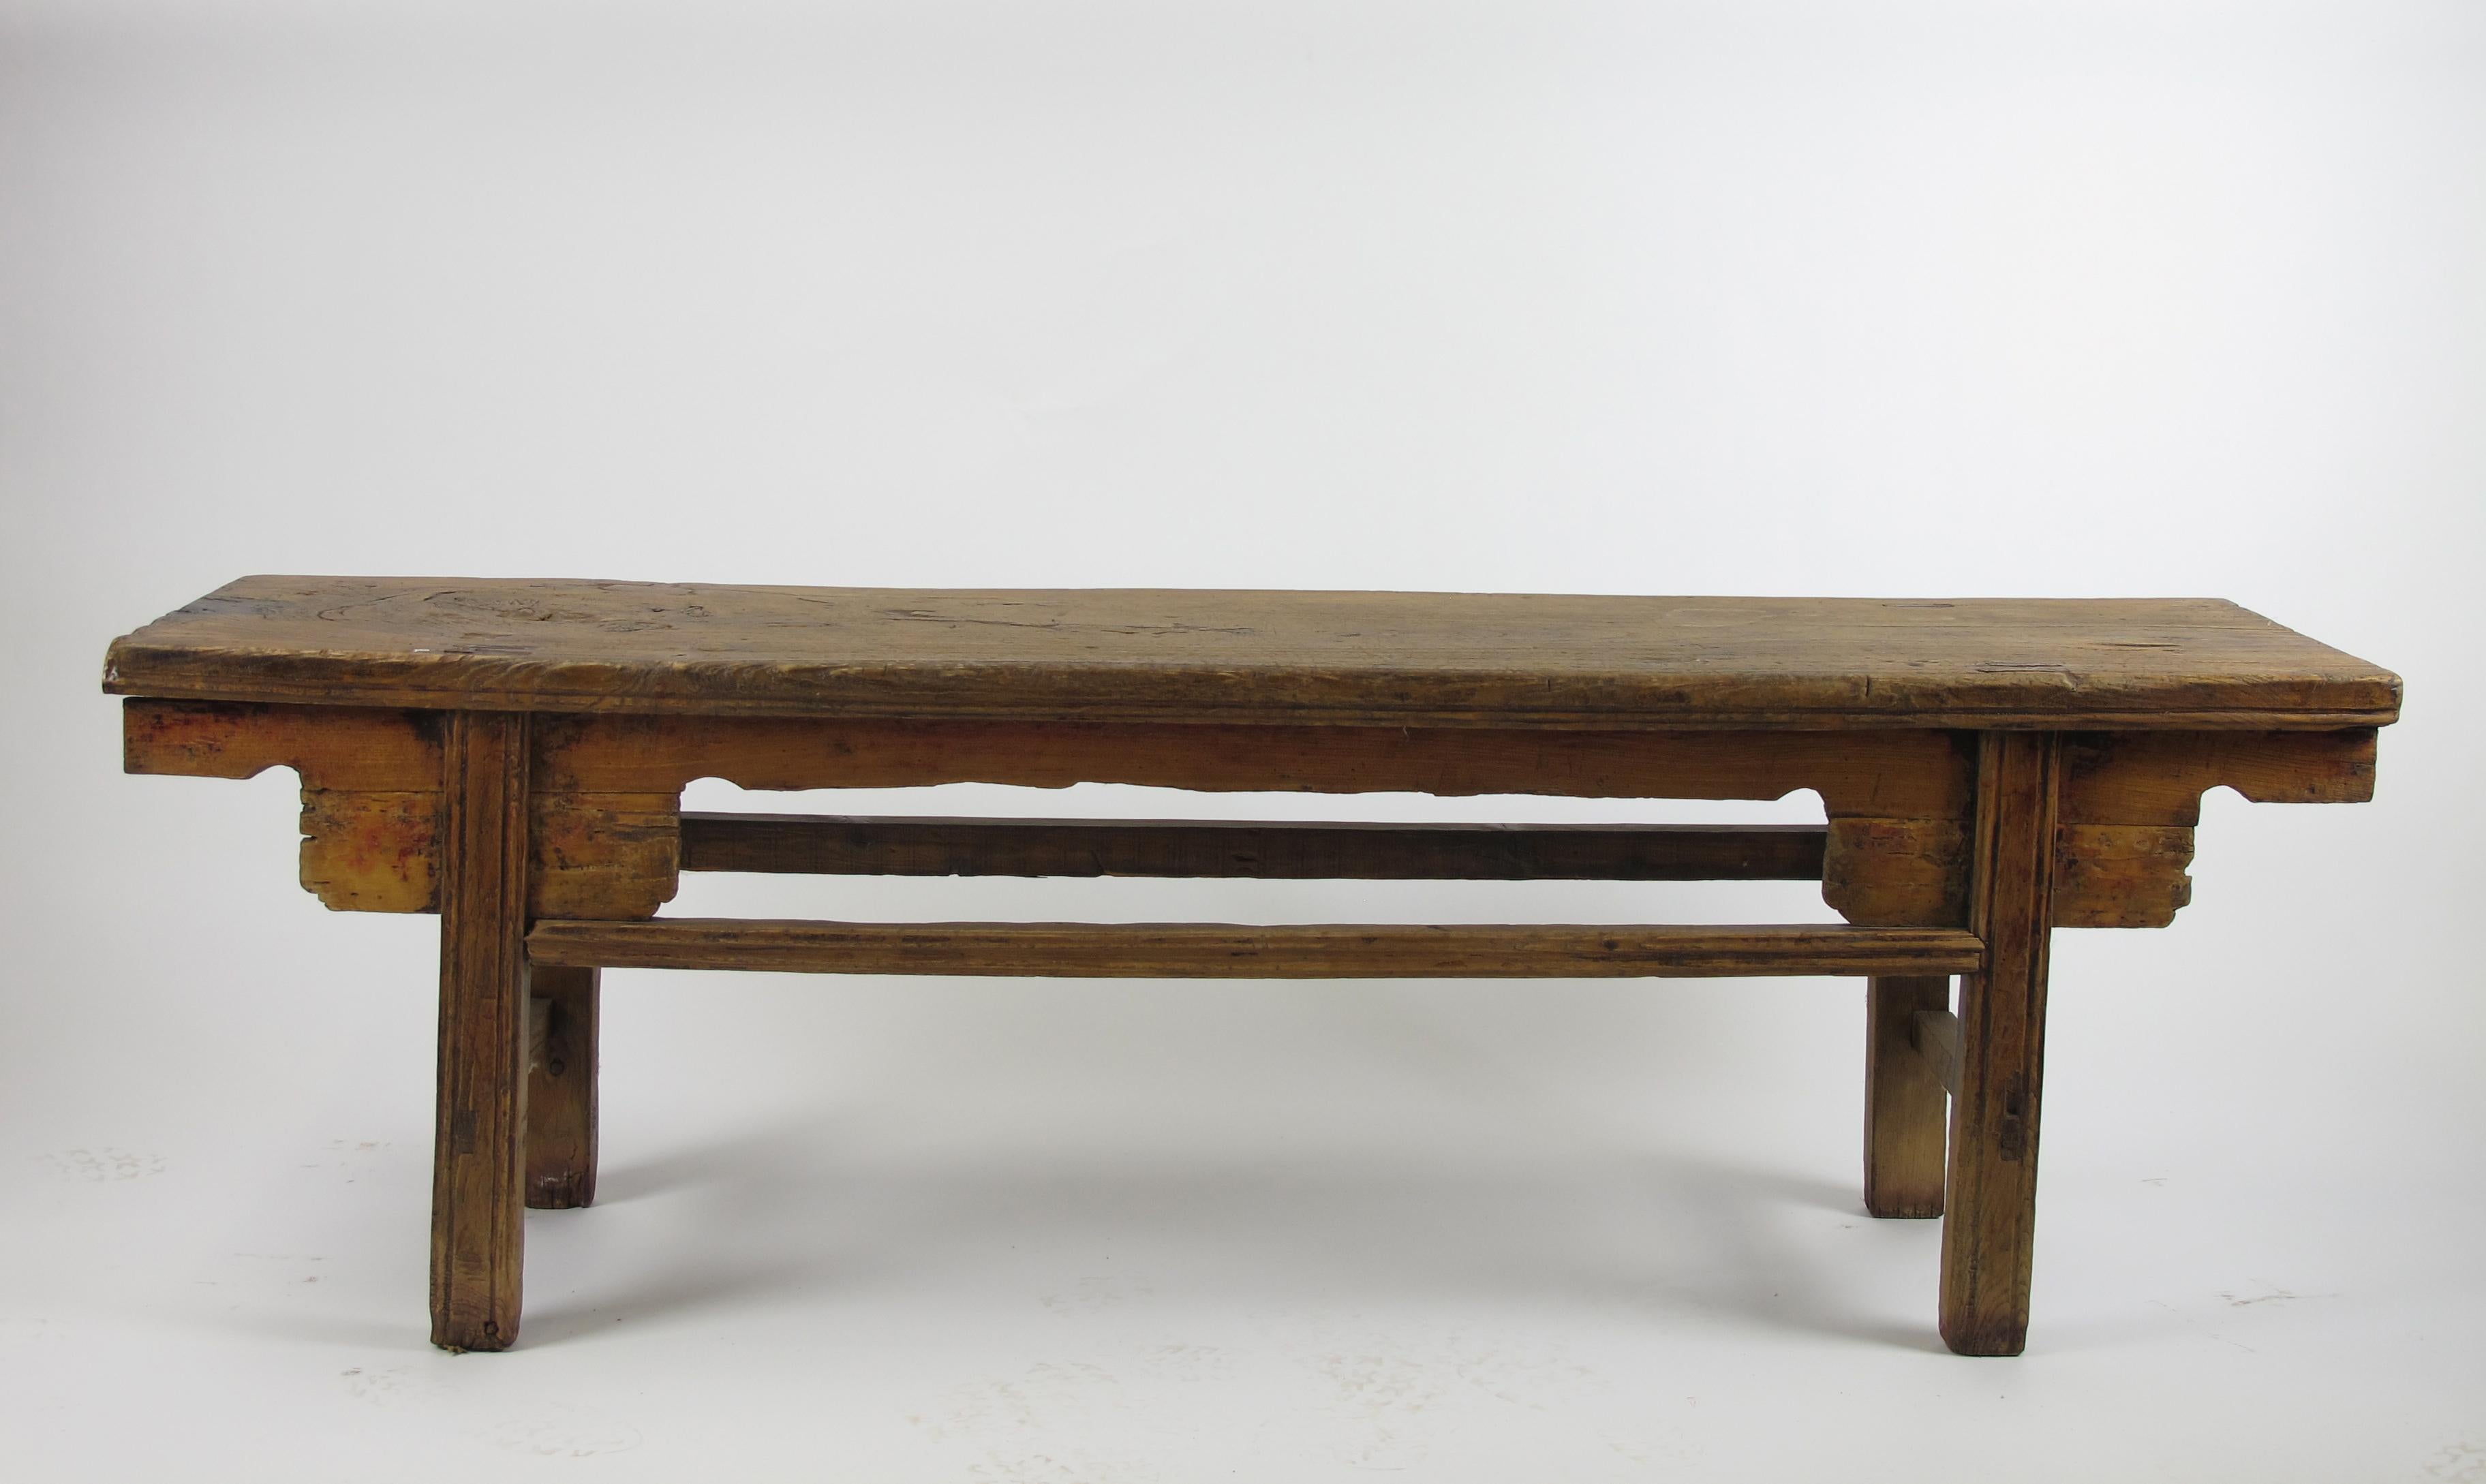 The top of this antique Chinese farmer’s bench is made of one solid piece elm with a large swirling wood knot. It shows natural aged warm color, lines, wood knots, and traditional exposed joints. It was used as a bench by the farmer’s family from